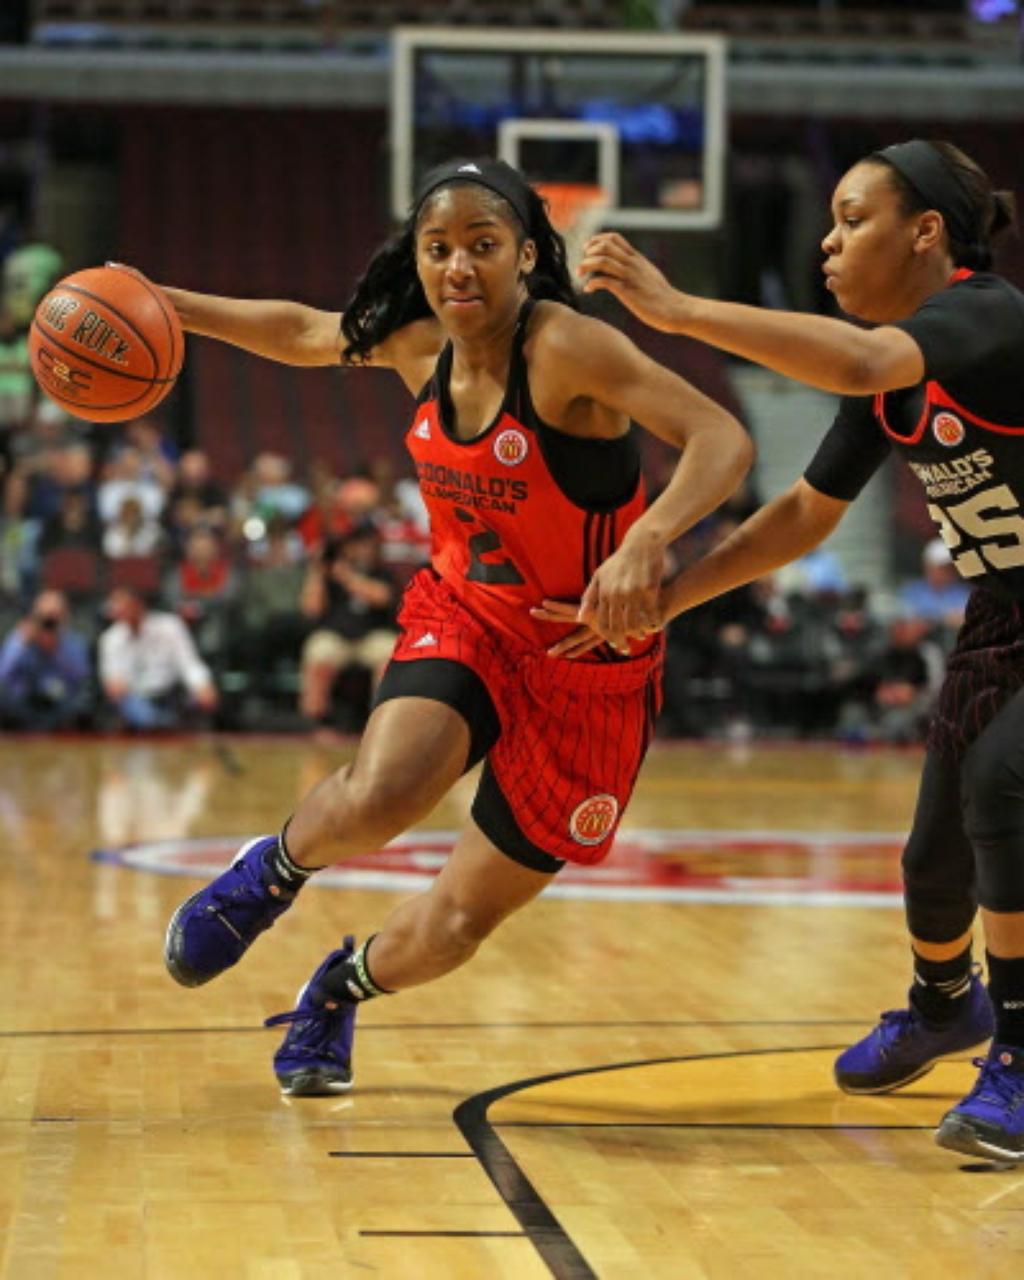 East beats West in McDonald's All American girls game